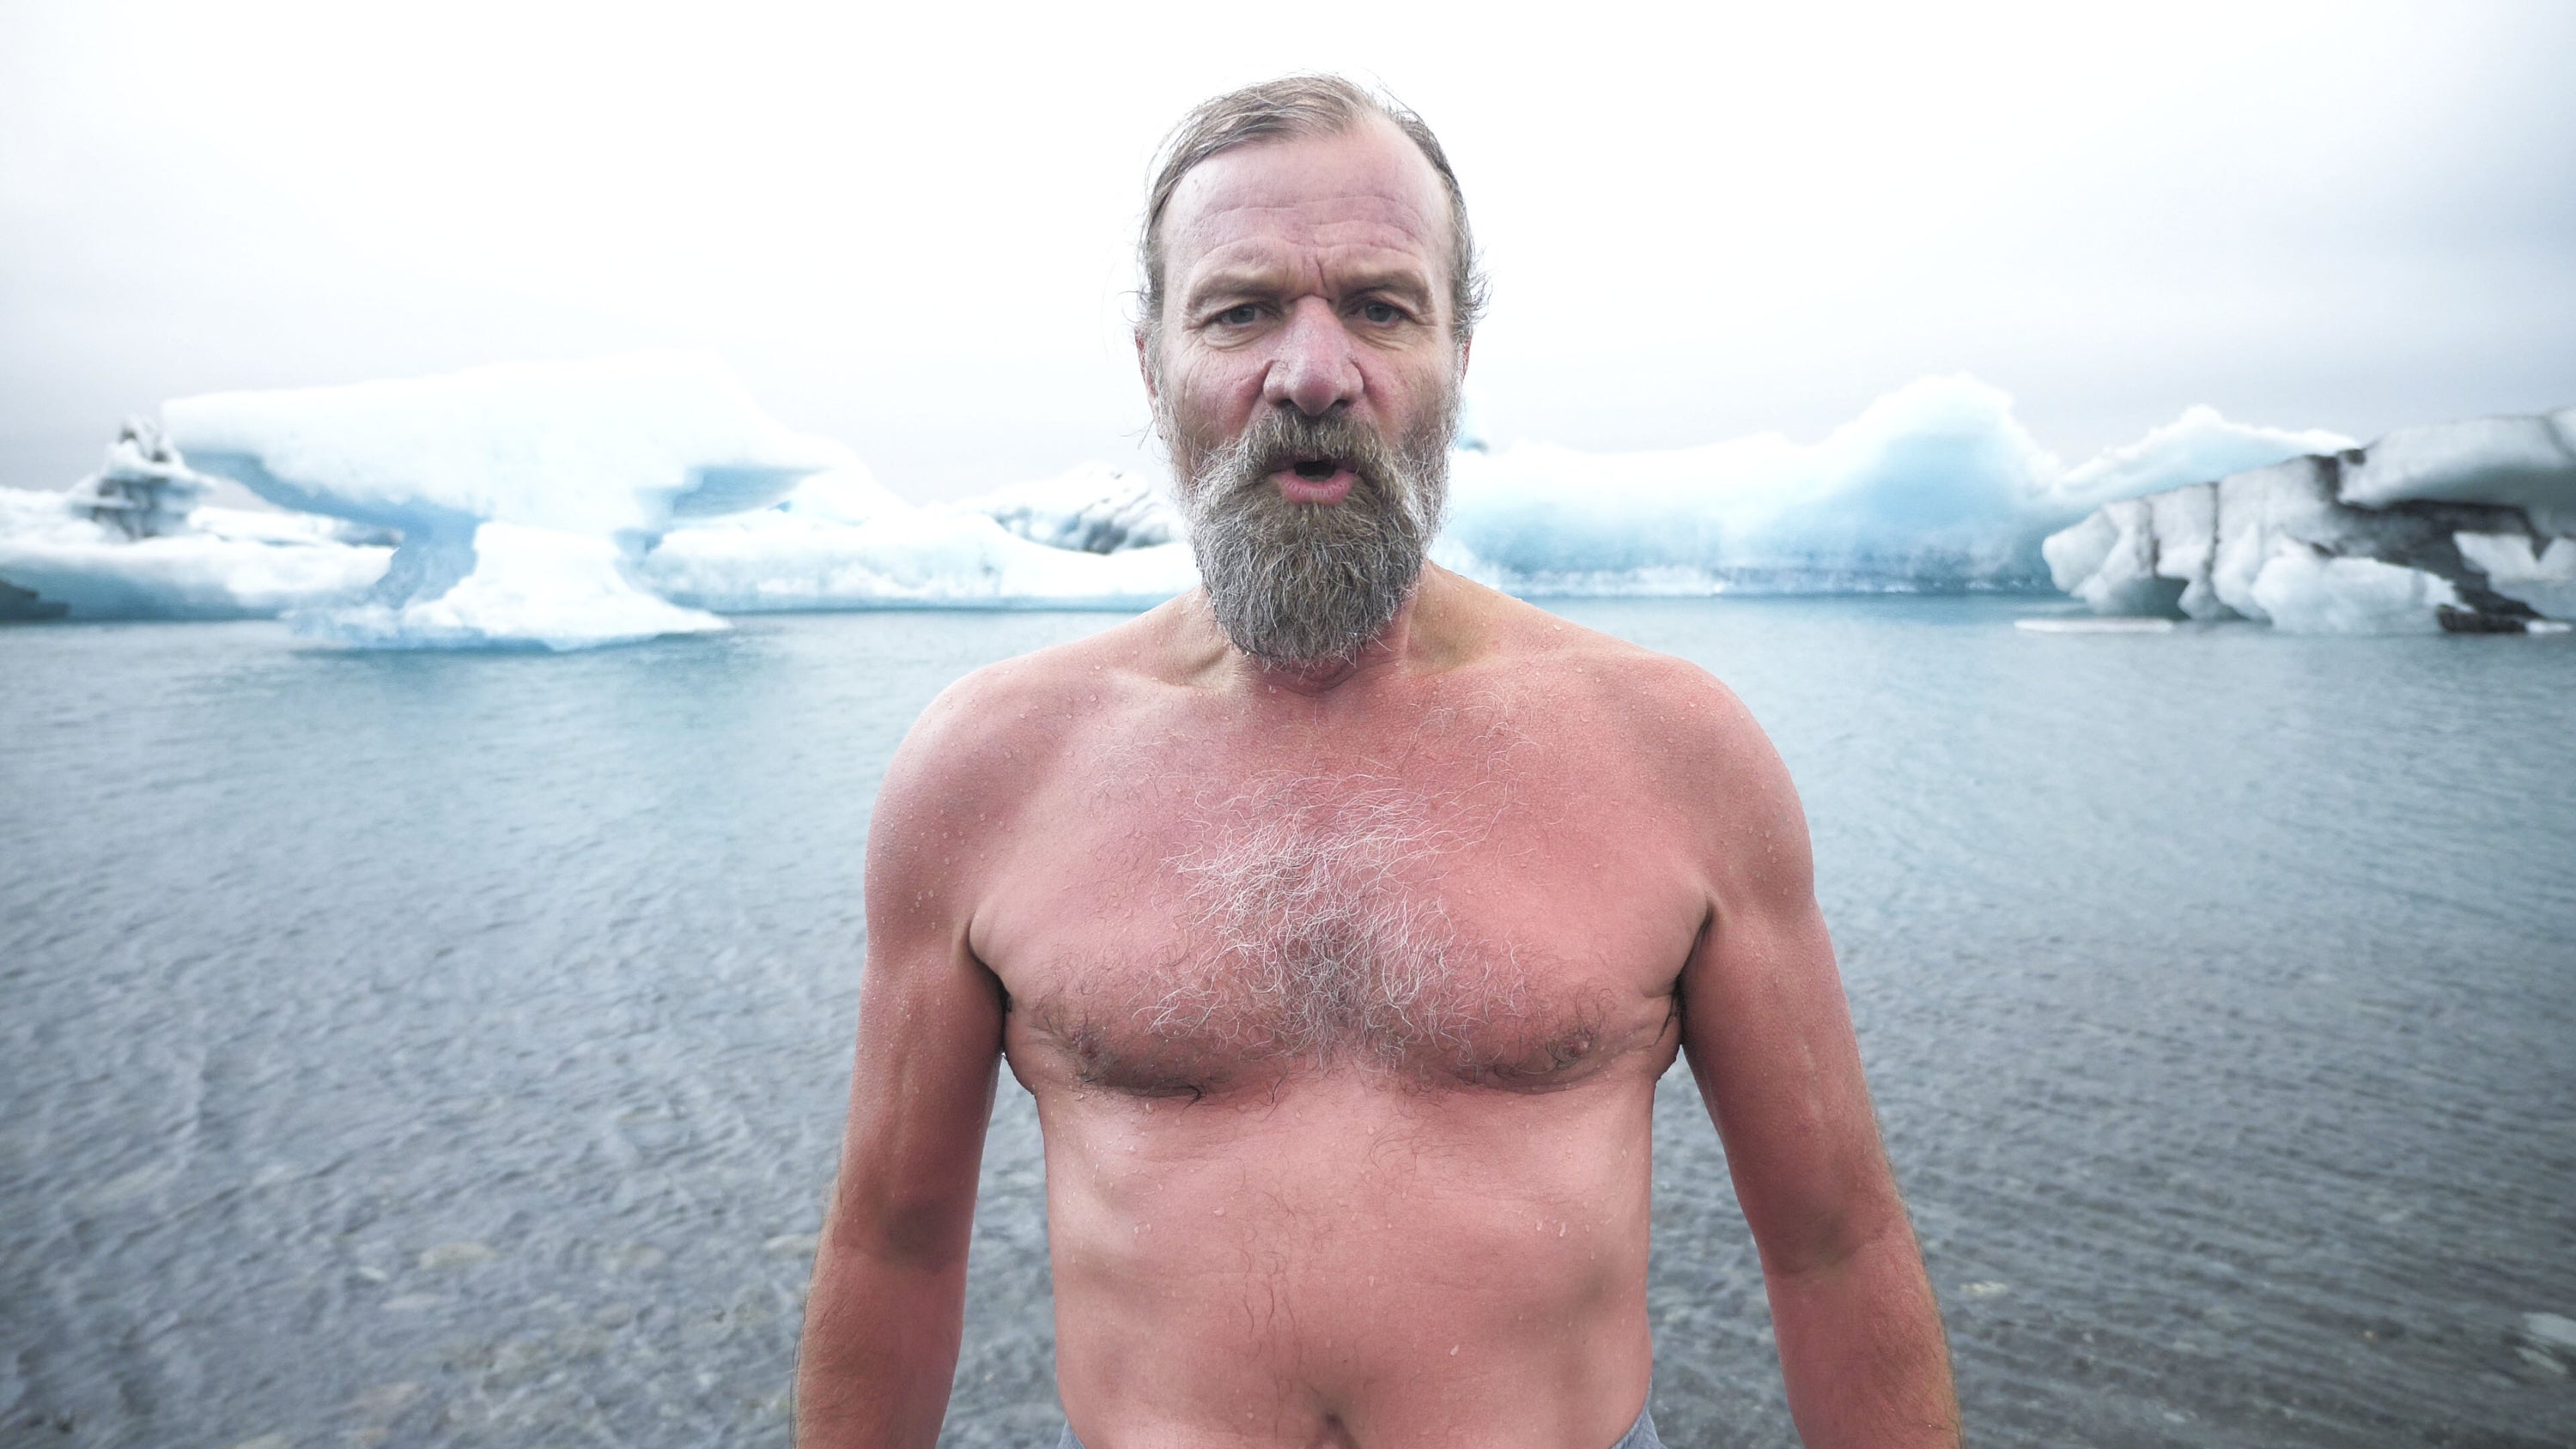 There are mixed findings on the effect of the Wim Hof Method on a person’s athletic abilities